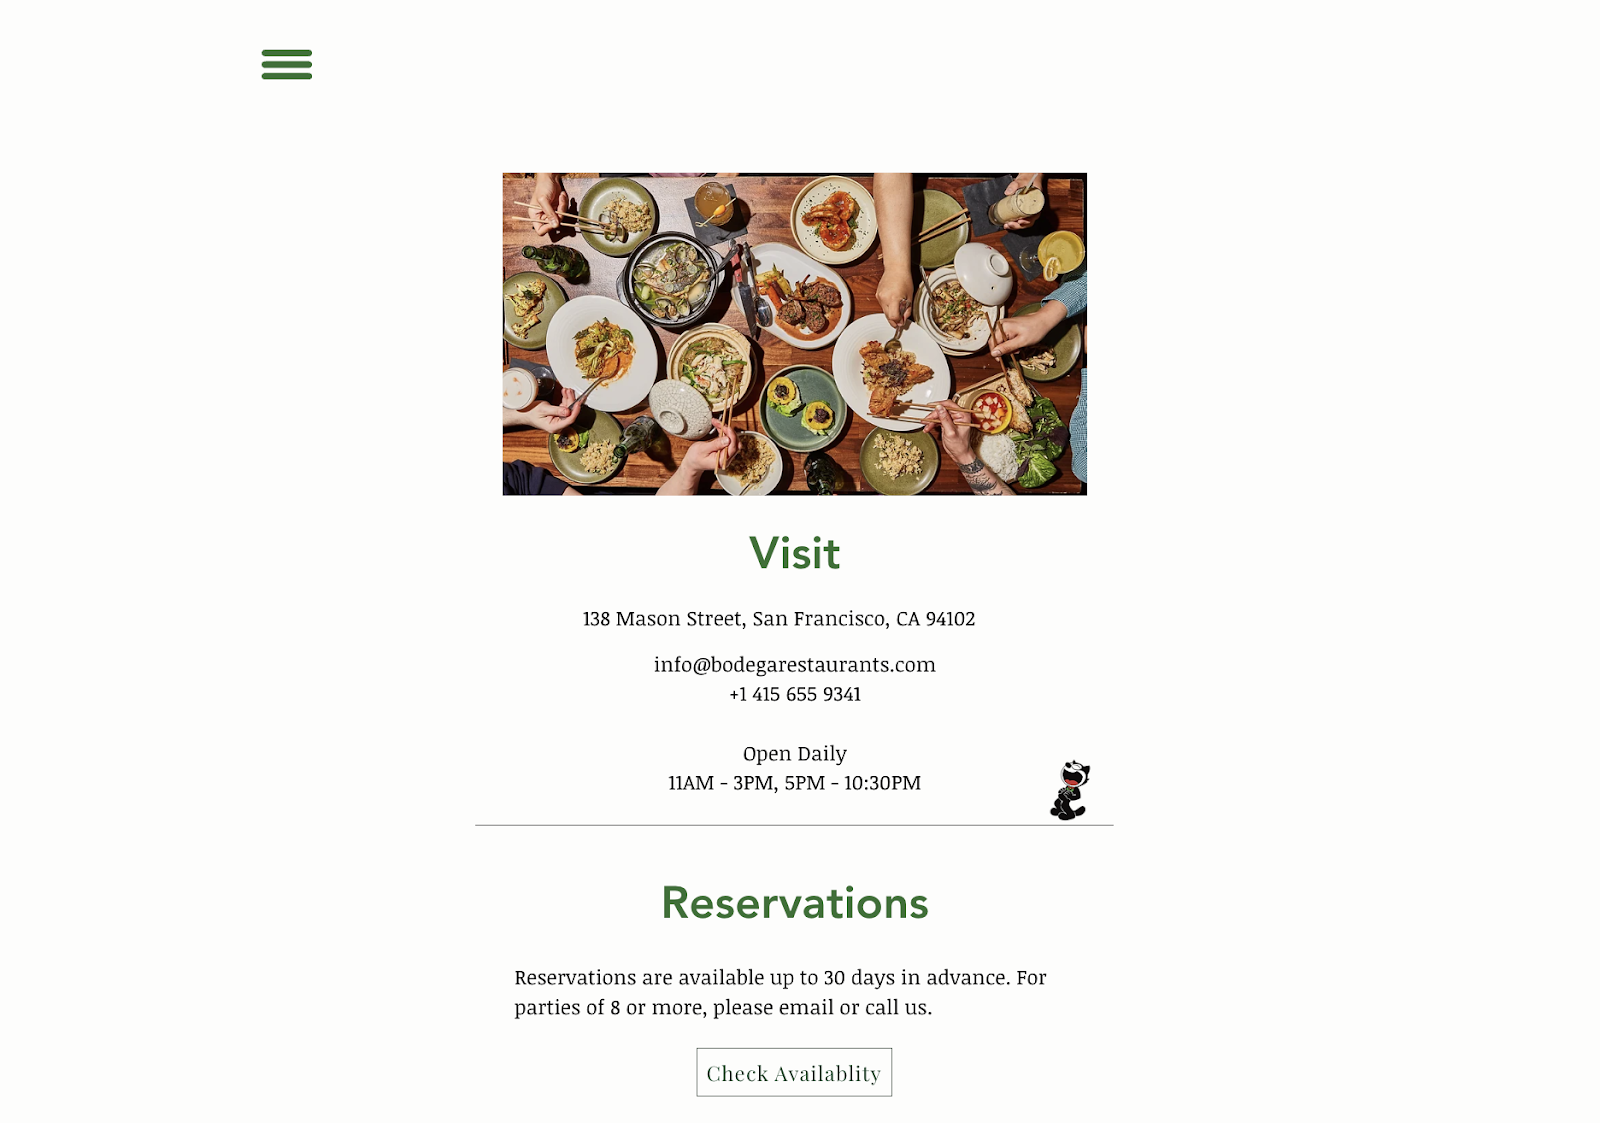 Restaurant marketing ideas: A simple website for the restaurant Bodega in San Francisco. The web page includes contact information, hours, and a reservation link. 